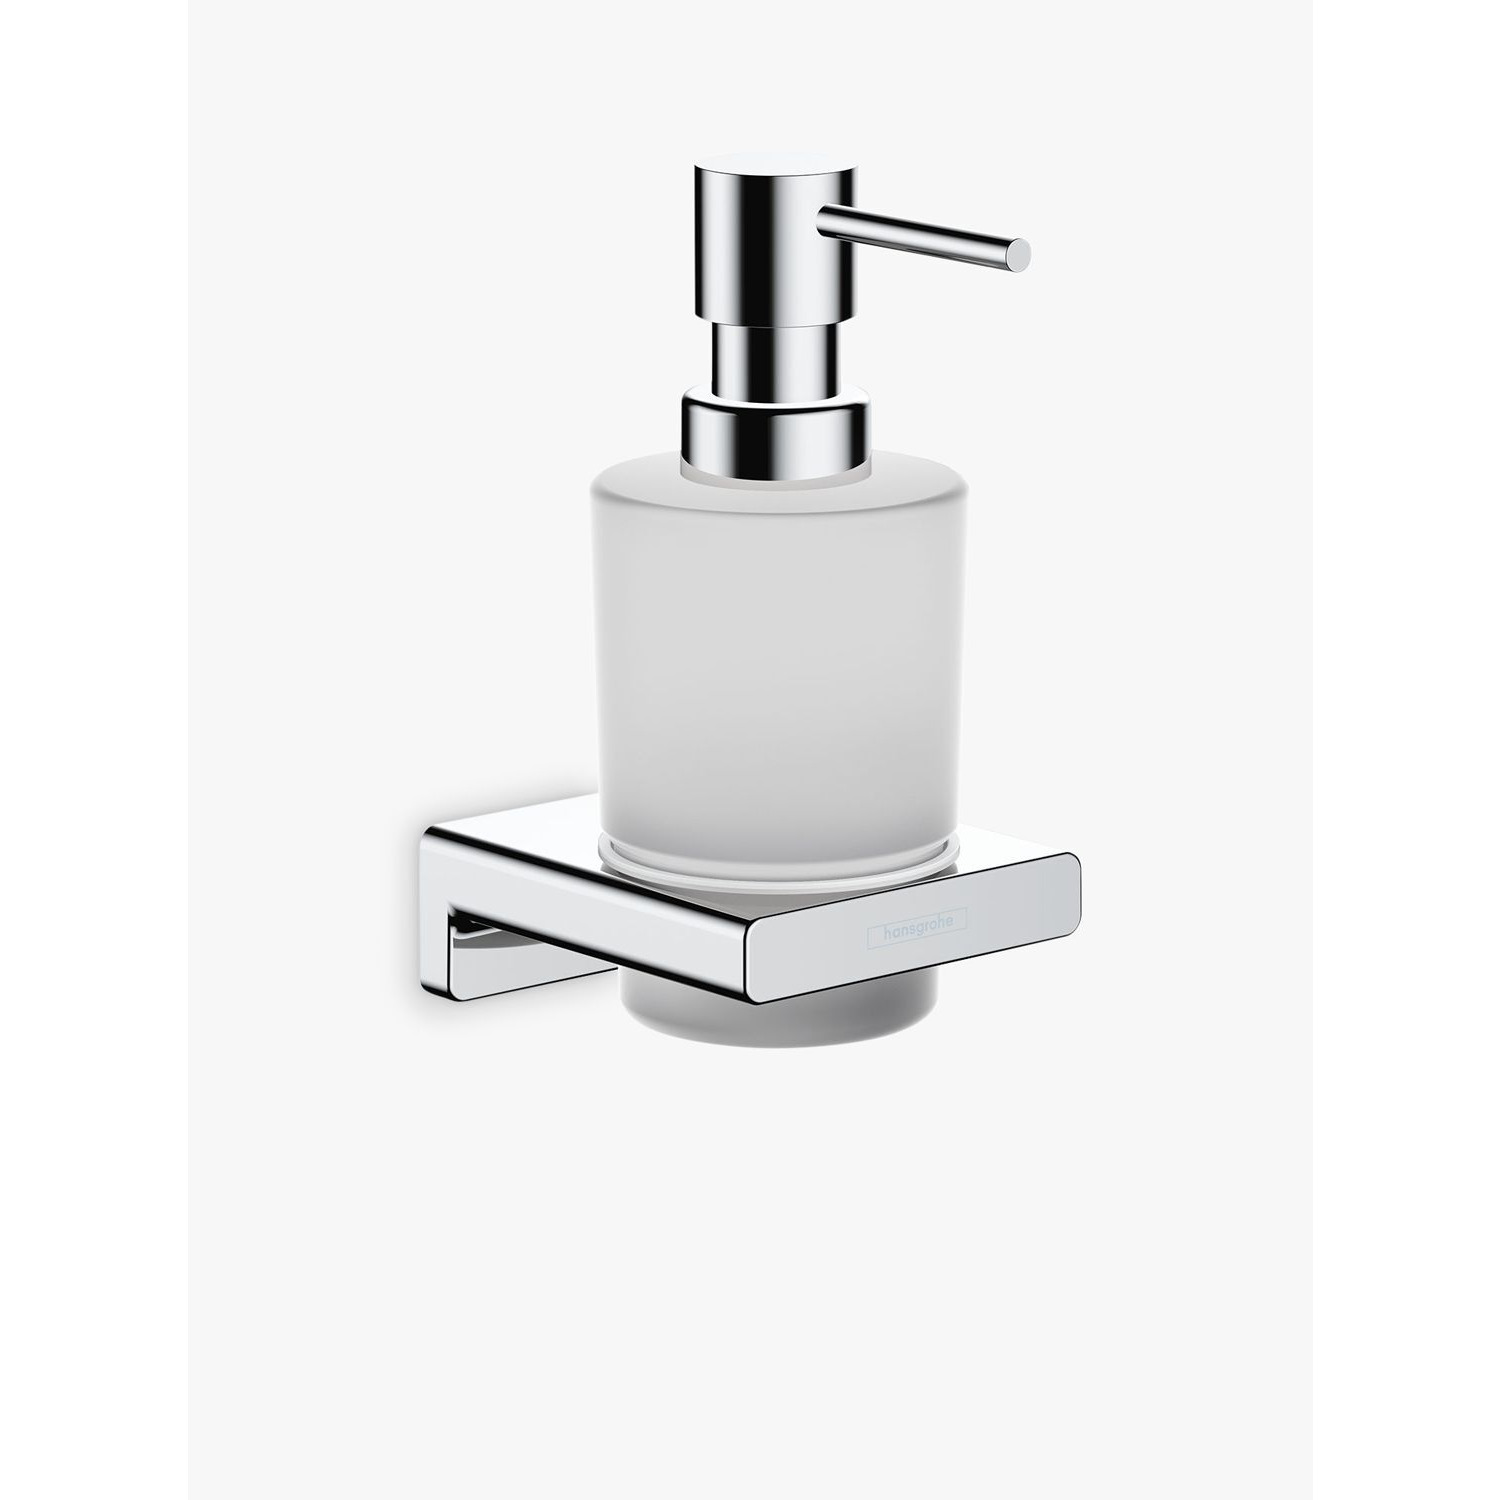 Hansgrohe AddStoris Wall-Mounted Soap Dispenser - image 1